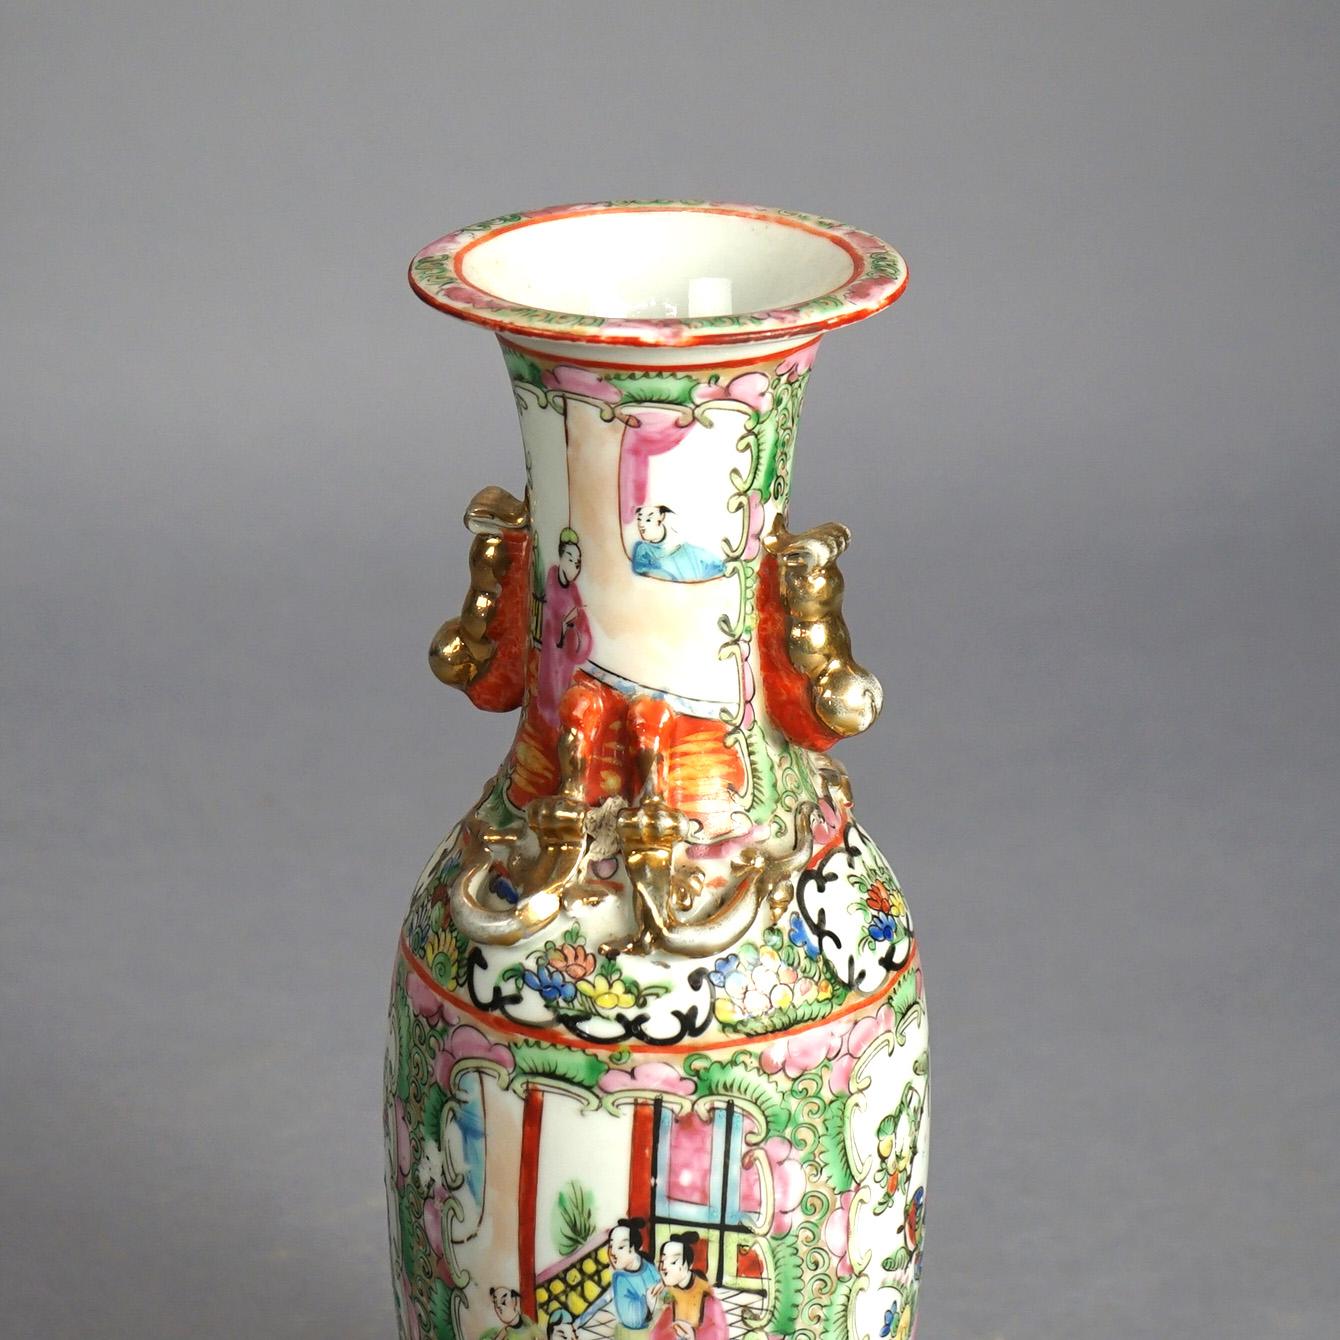 Antique Chinese Rose Medallion Porcelain Double Handled Vase with Garden and Genre Scenes c1900

Measures - 11.5